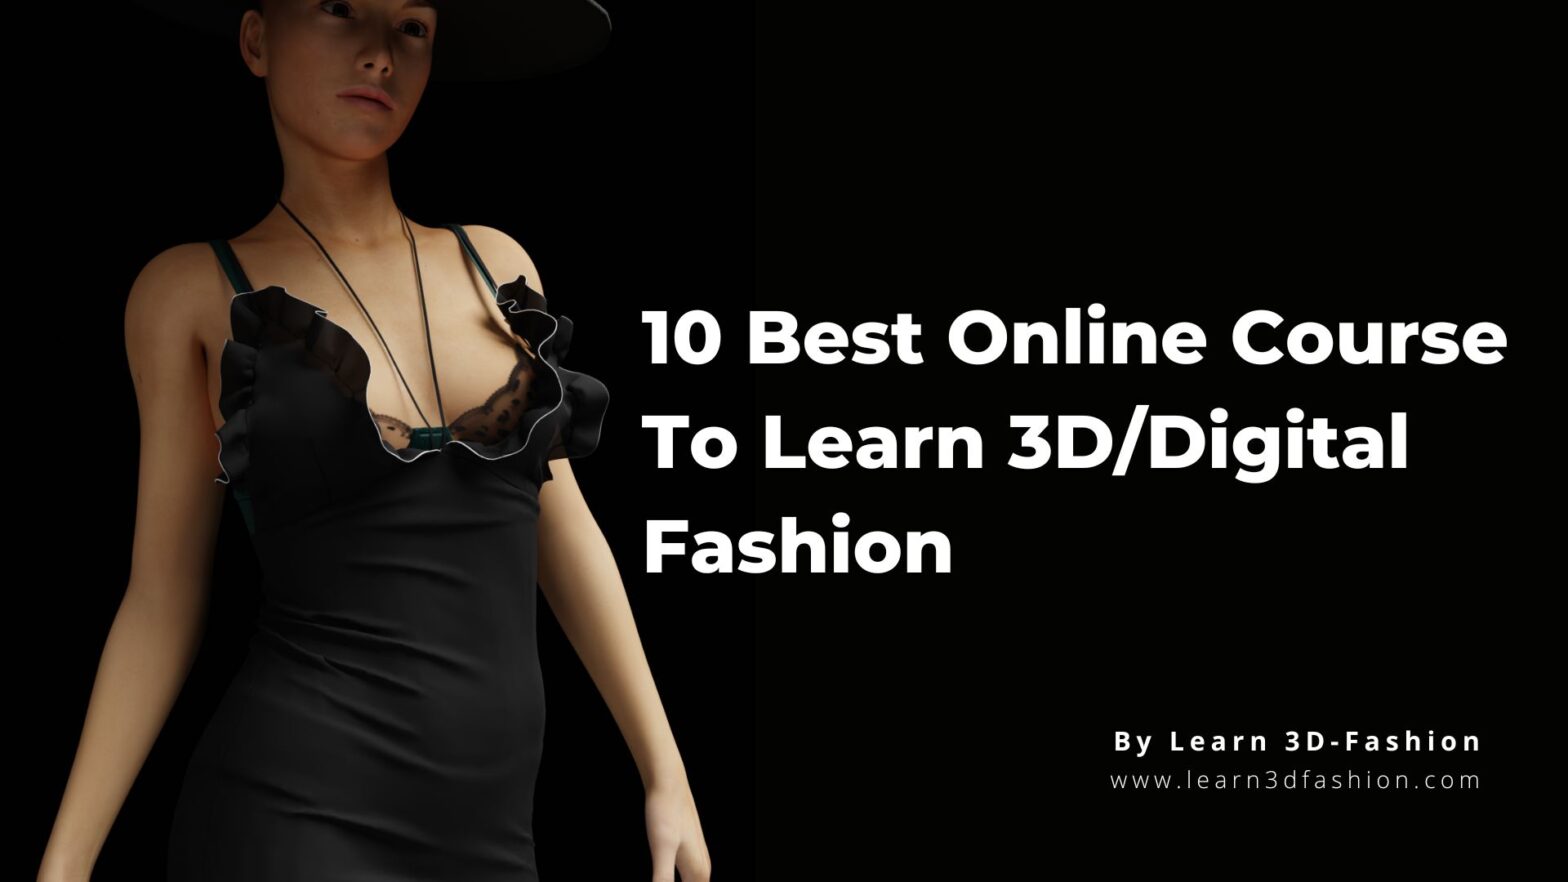 learn 3D fashion 10 best online course cover image